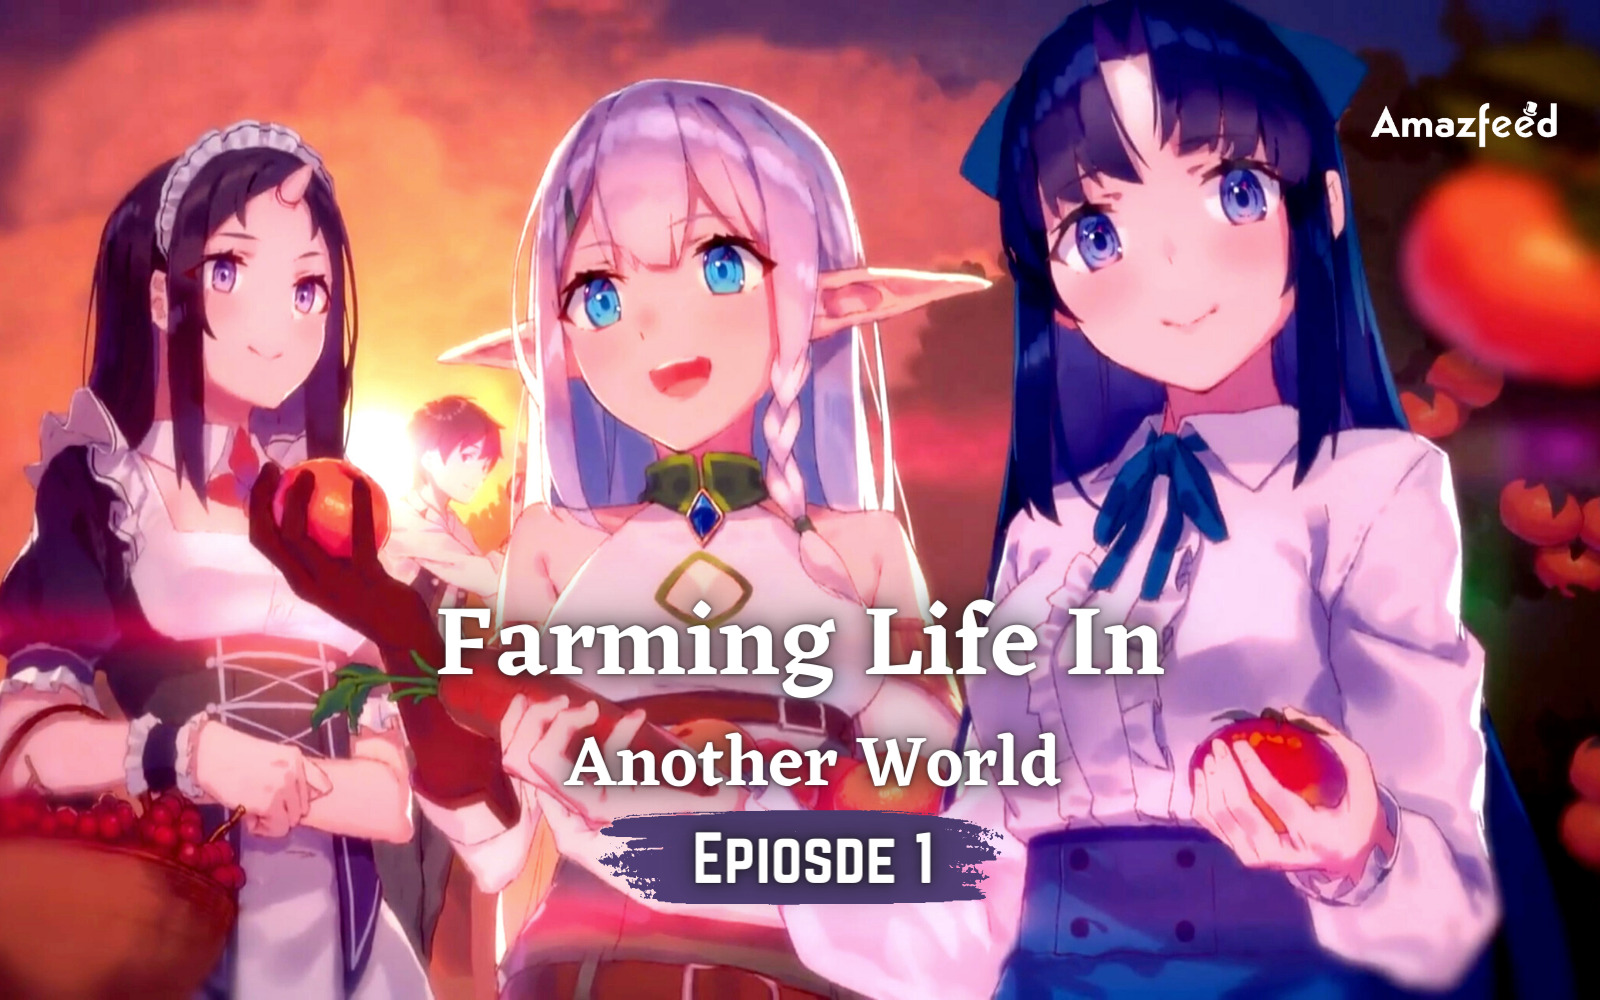 Farming Life In Another World Season 1 Episode 1 Release Date, Spoiler